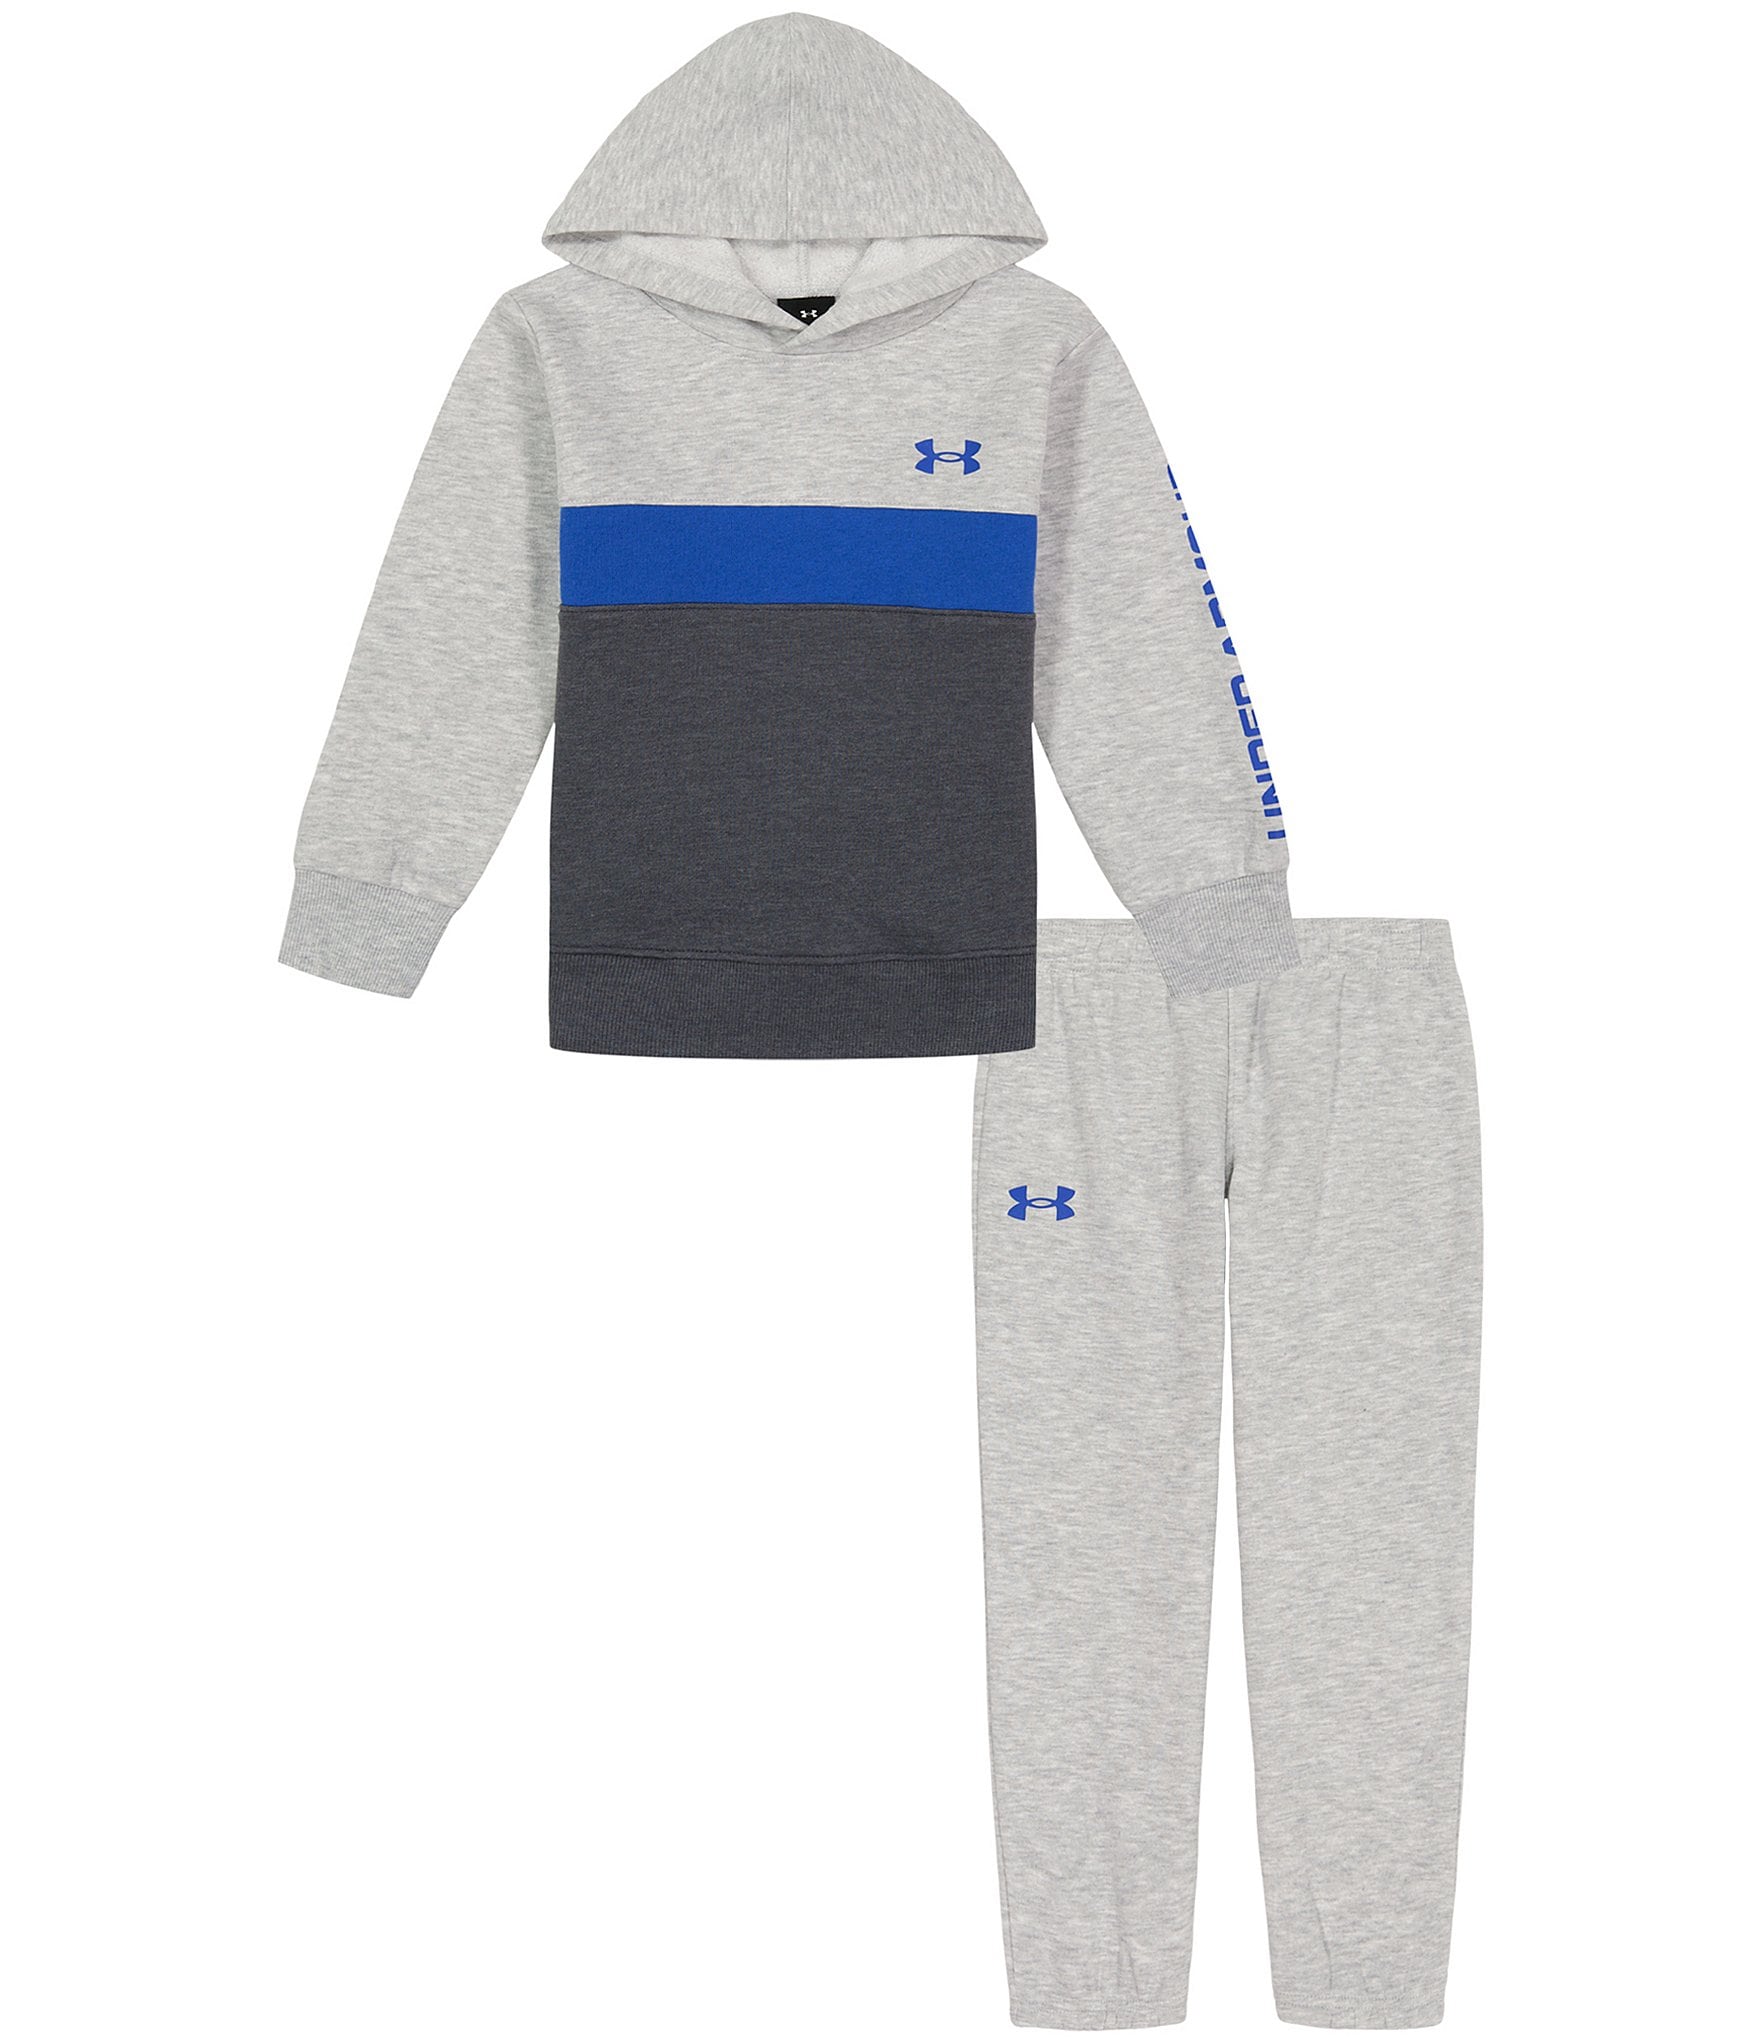 hoody: Boys' Outfits & Clothing Sets 2T-7